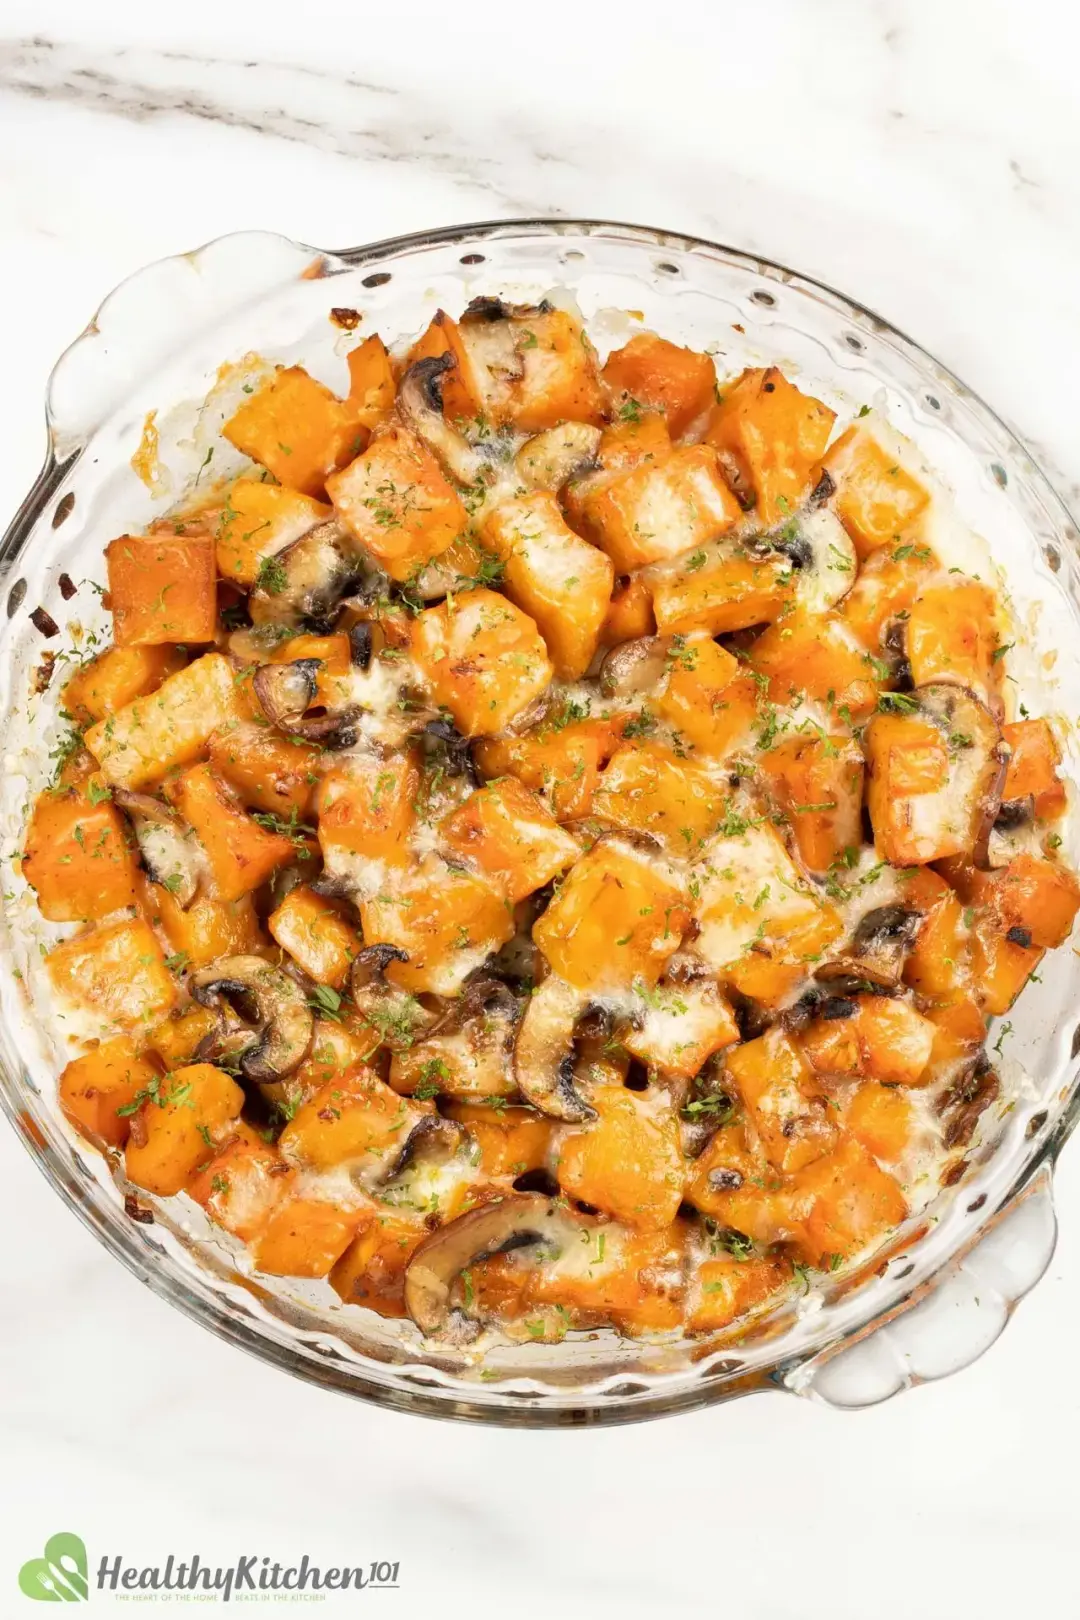 A round casserole dish filled with baked butternut squash and mushrooms, topped with melted cheese